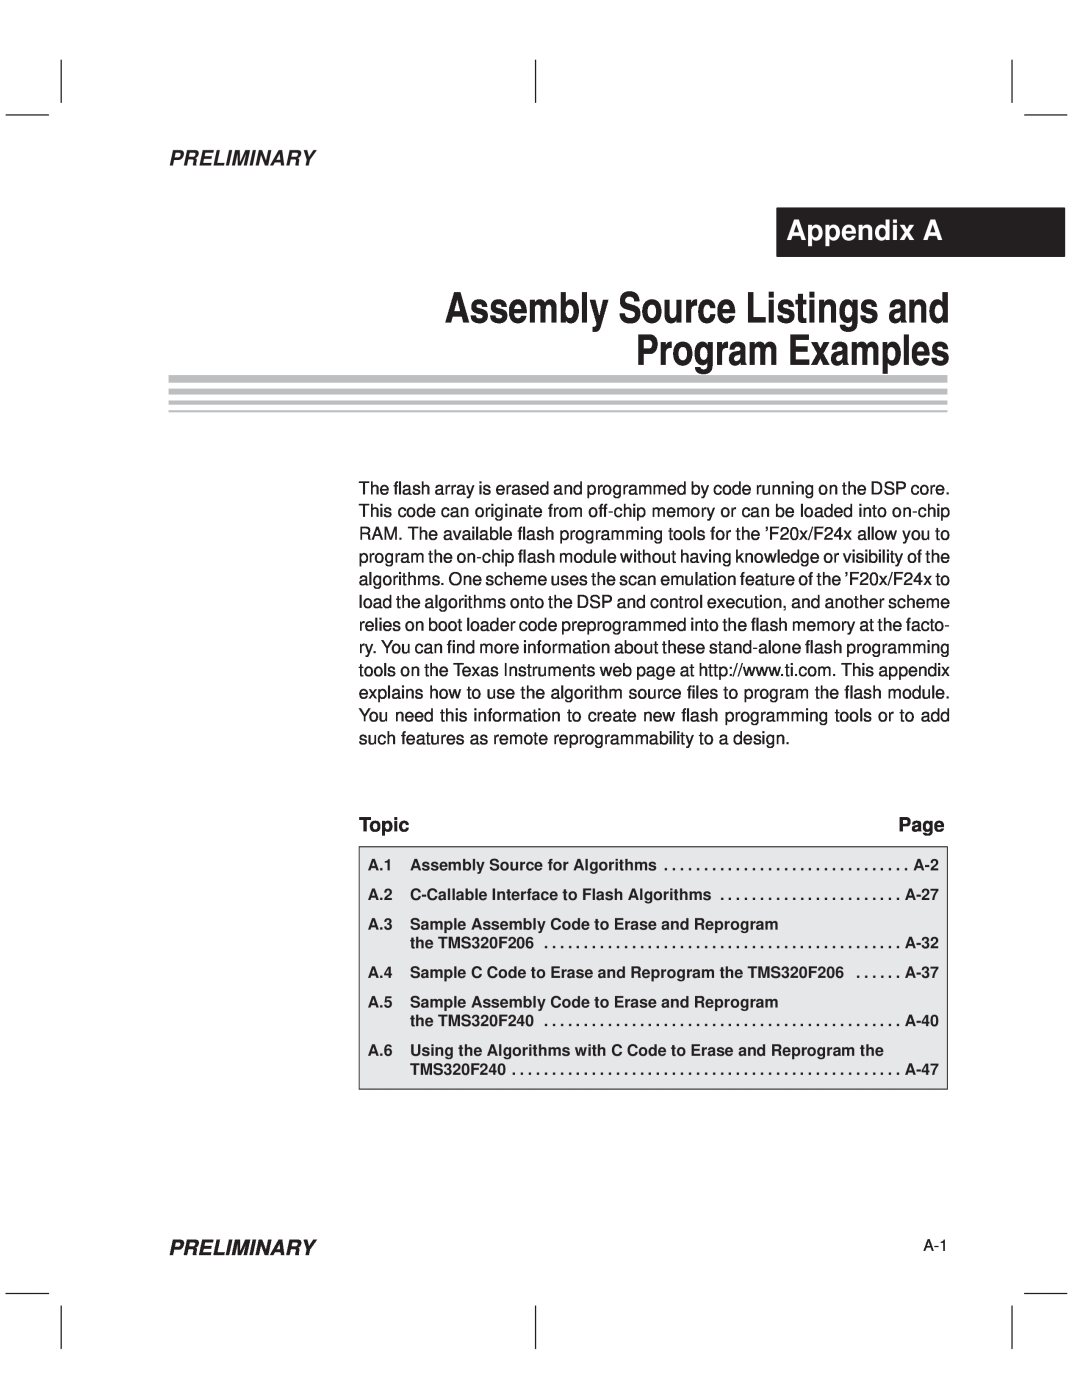 Texas Instruments TMS320F20x/F24x DSP Assembly Source Listings and Program Examples, AppendixAppendixAA, Preliminary, Page 